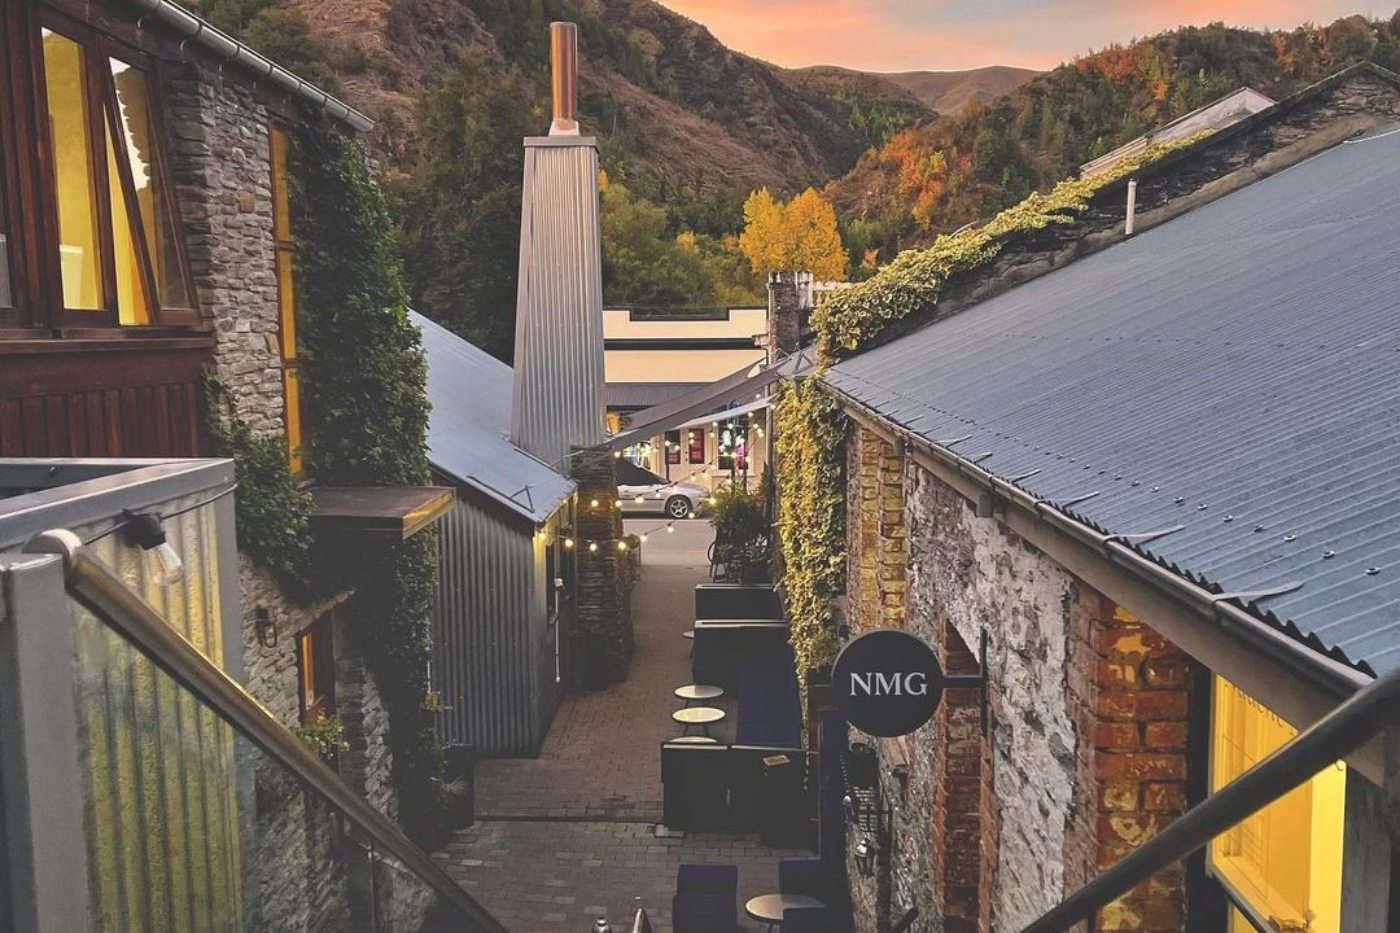 Alleyway view of Arrowtown shops at sunset